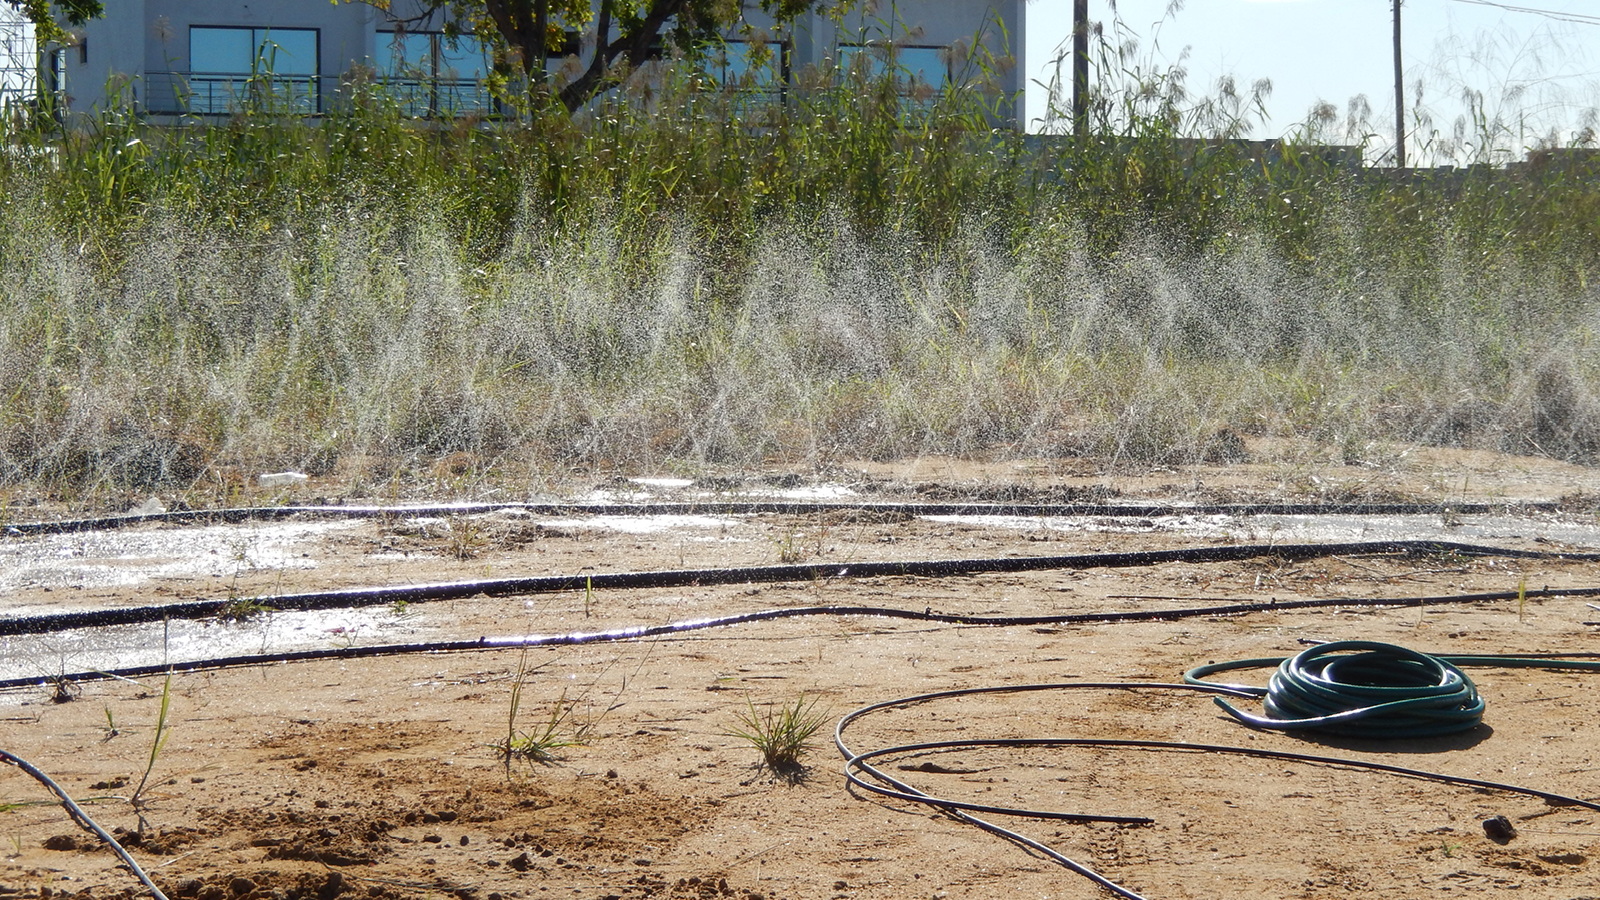 Mist irrigation at a site in Mozambique - climate change is changing irrigation practices